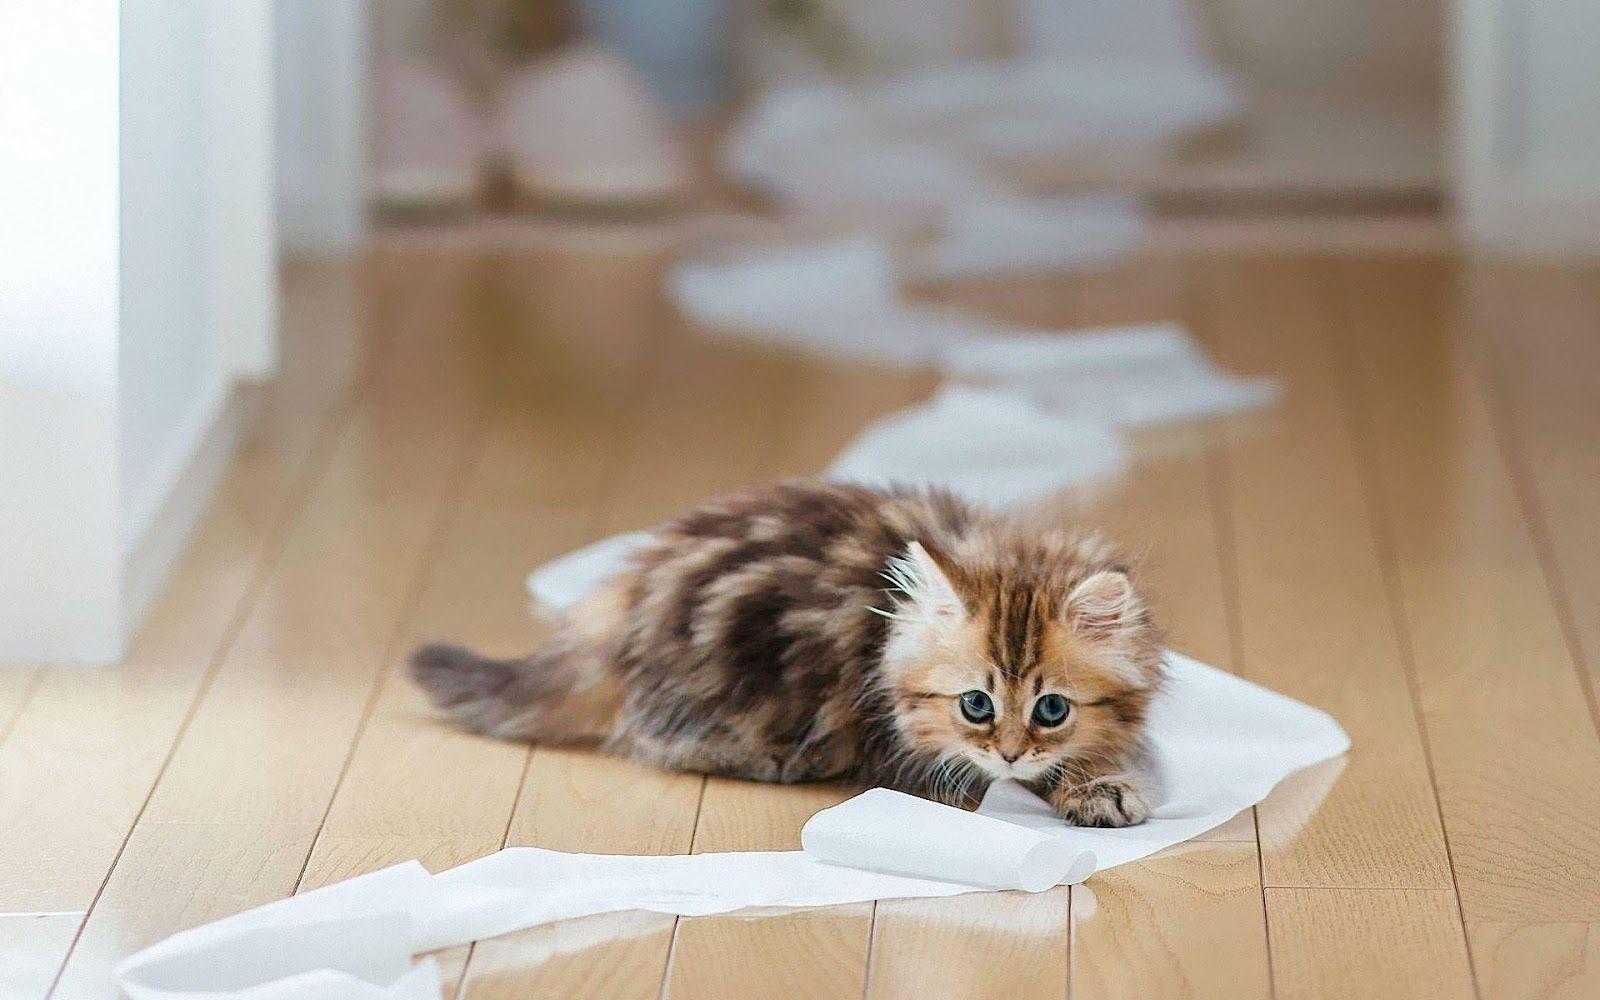 Kitten playing with toilet paper. HD Animals Wallpaper. Nature's